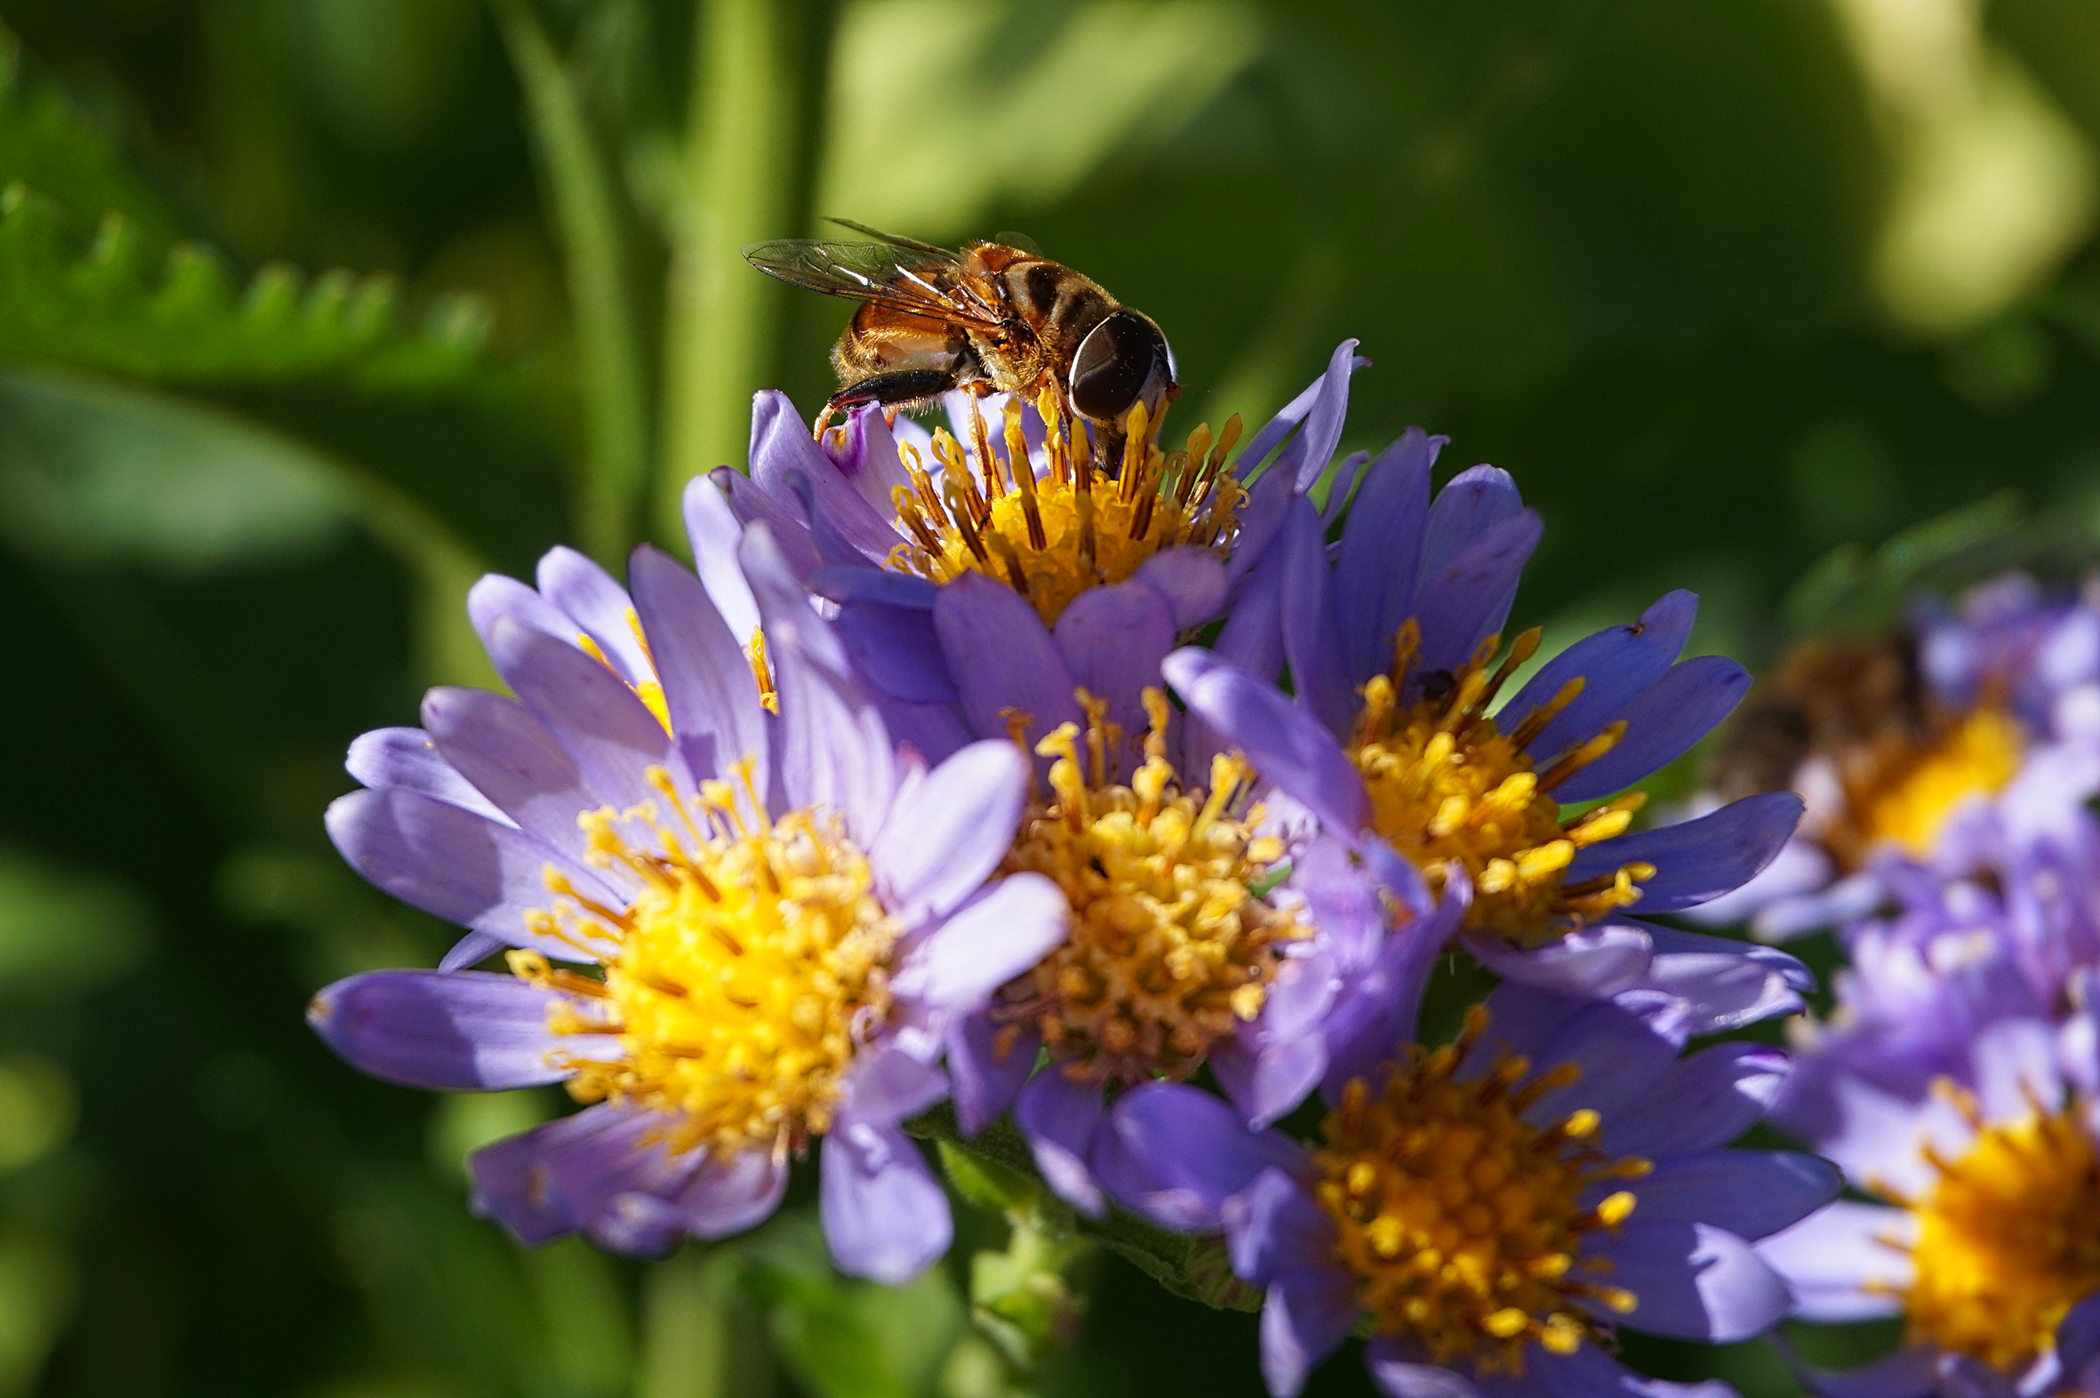 Photograph by Heather Coste of an Aster tataricus 'Jindai' and hoverfly.